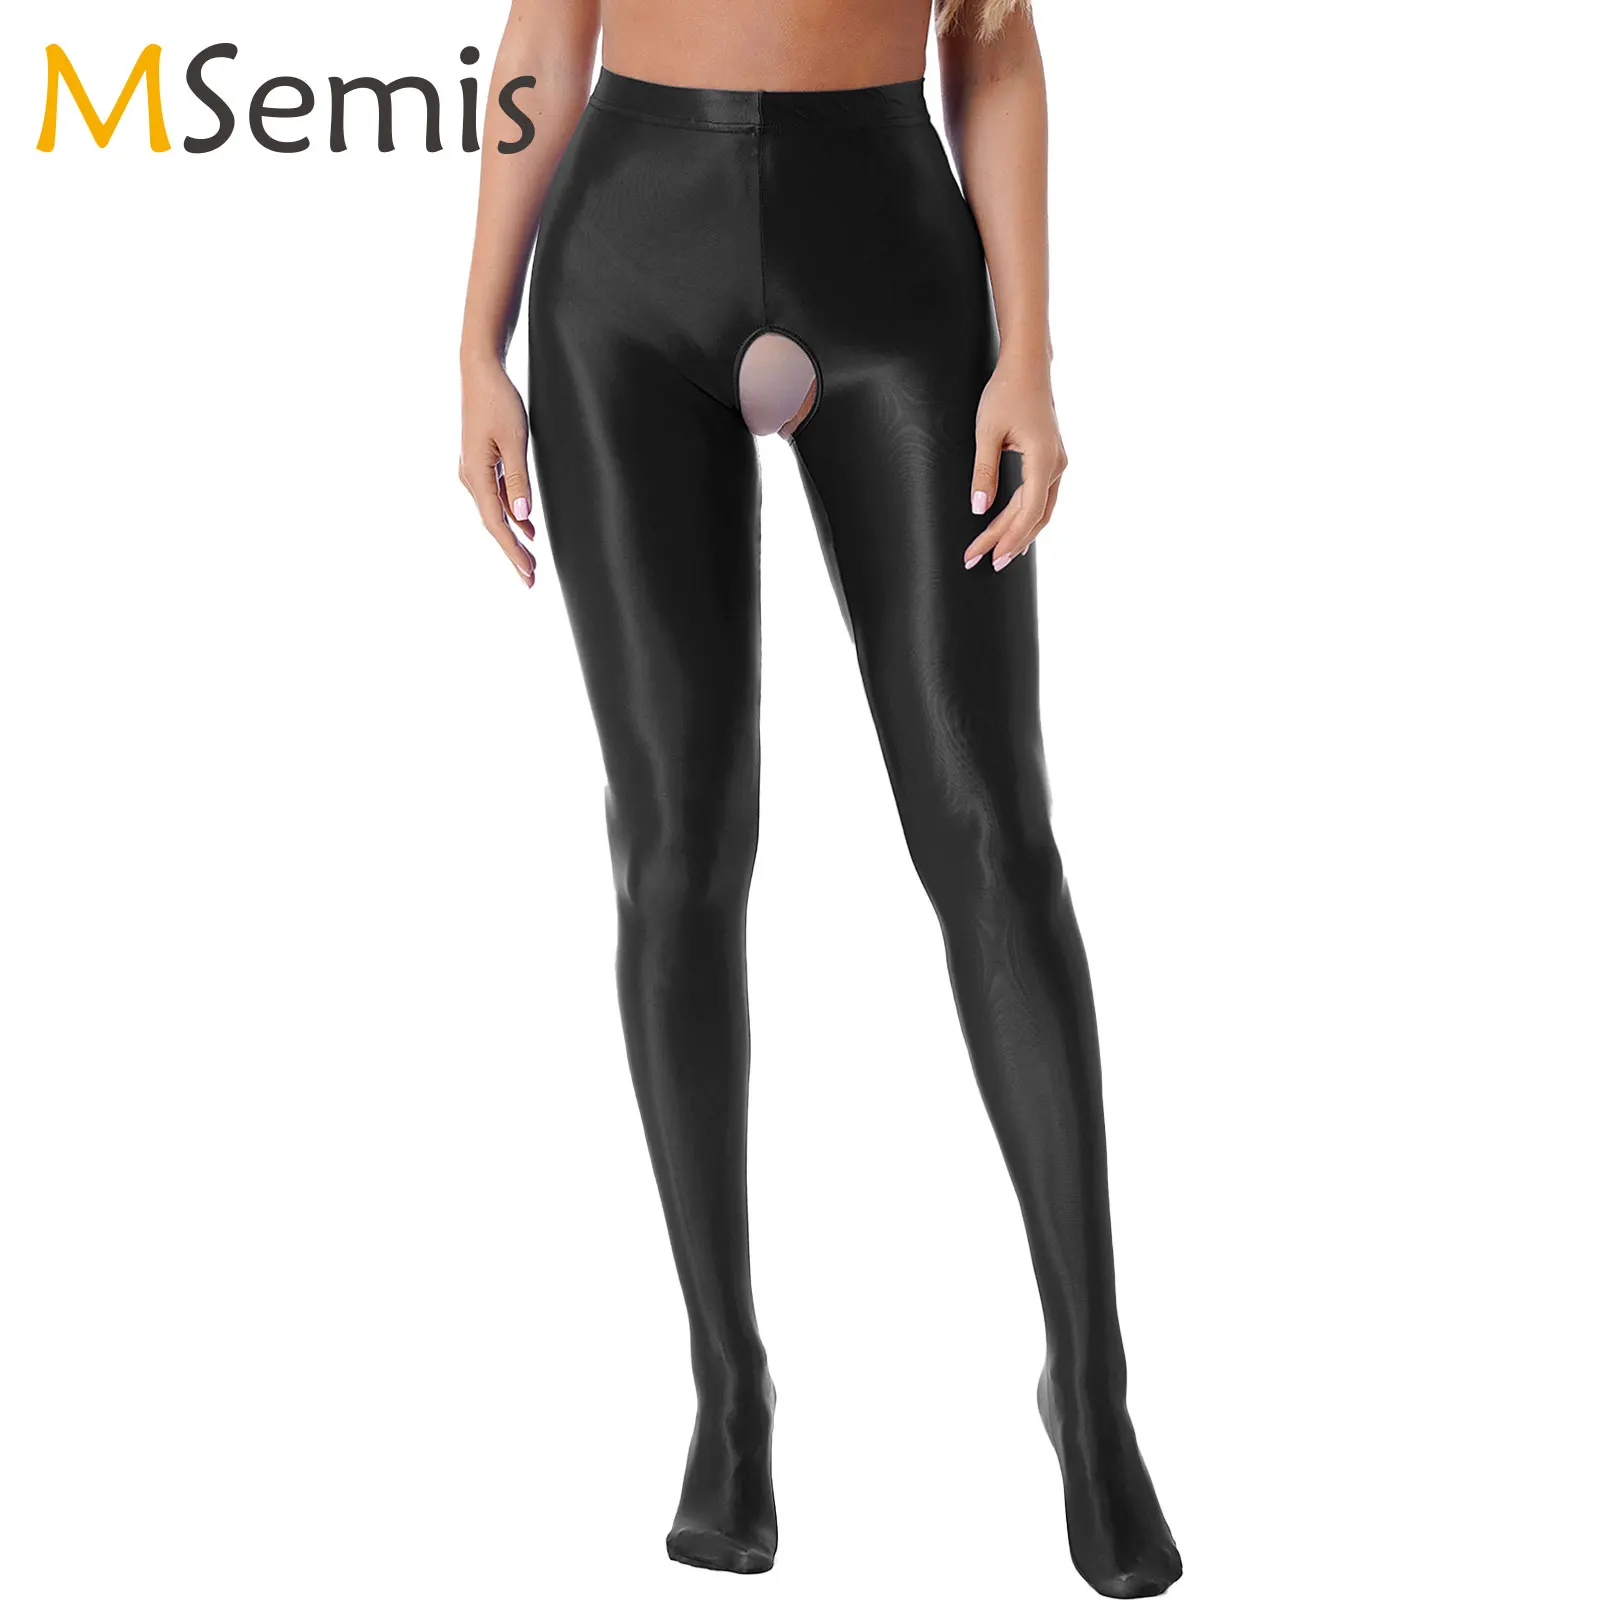 

Womens Glossy Crotchless Pantyhose Sexy High Waist Oily Shiny Tights Leggings Pants Exotic Wetlook Open Crotch Tights Stockings